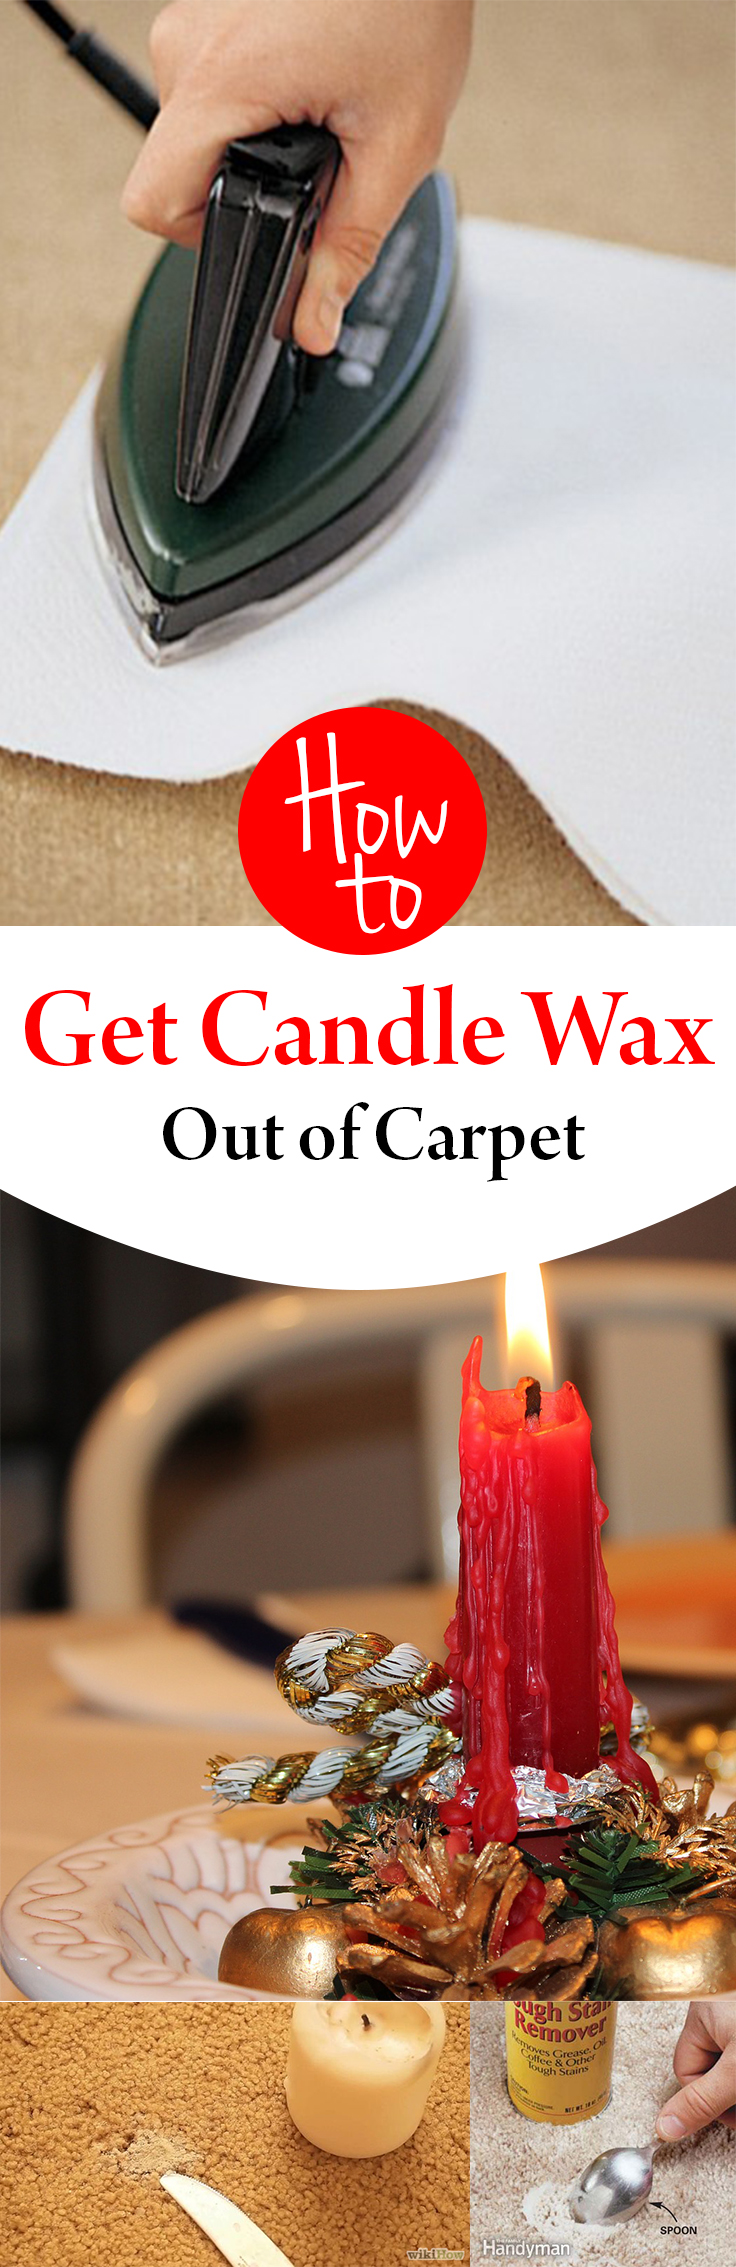 How to Get Candle Wax Out of Carpet - Wrapped in Rust